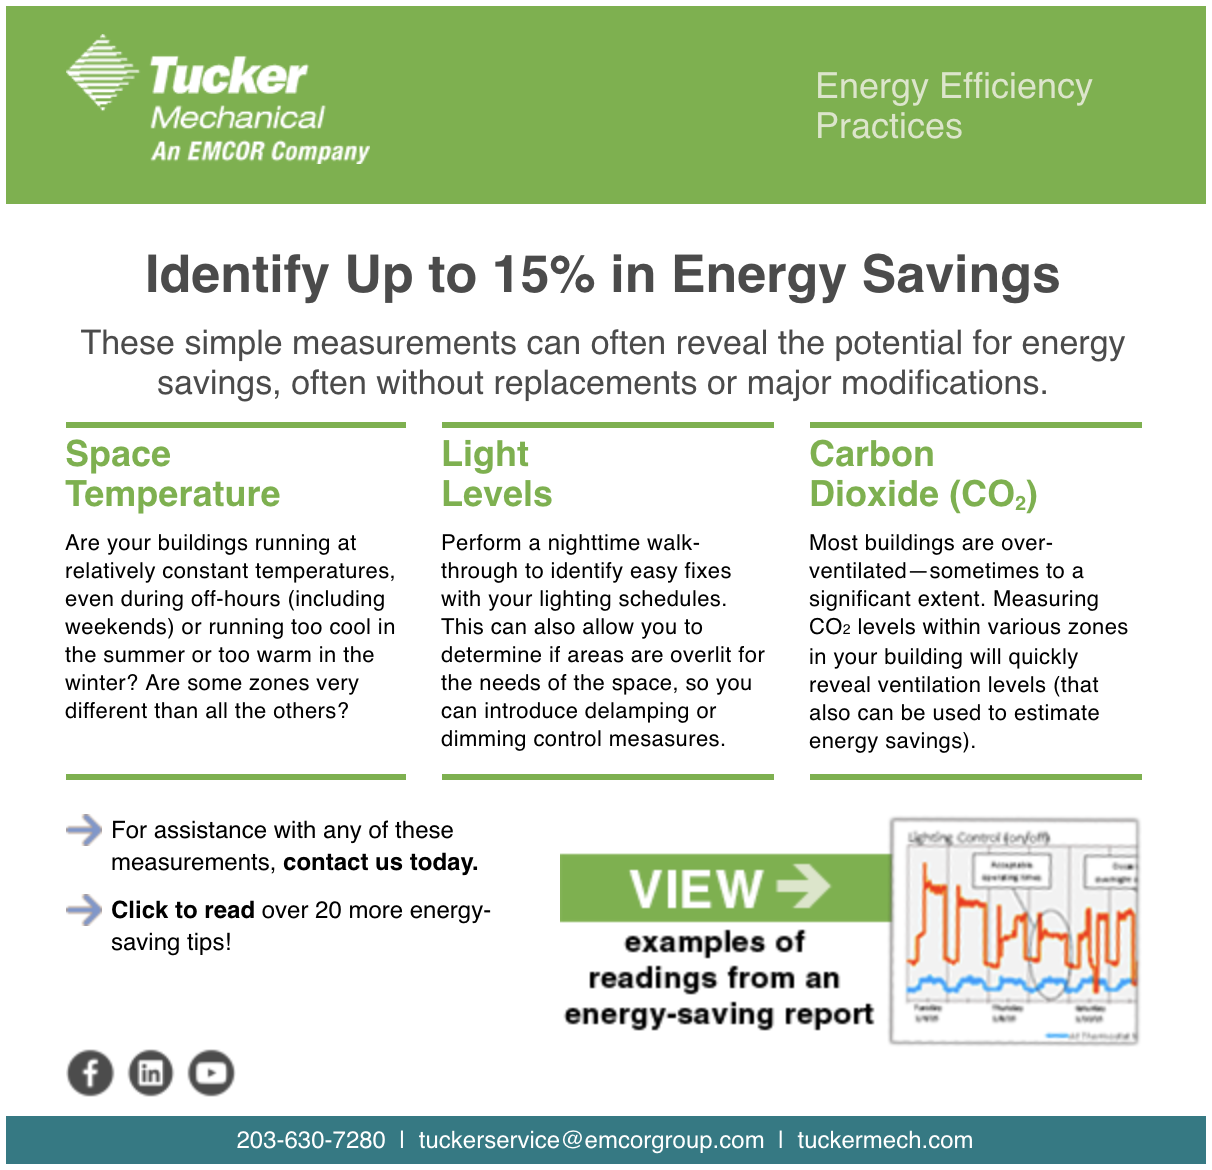 Identify up to 15% in energy savings.